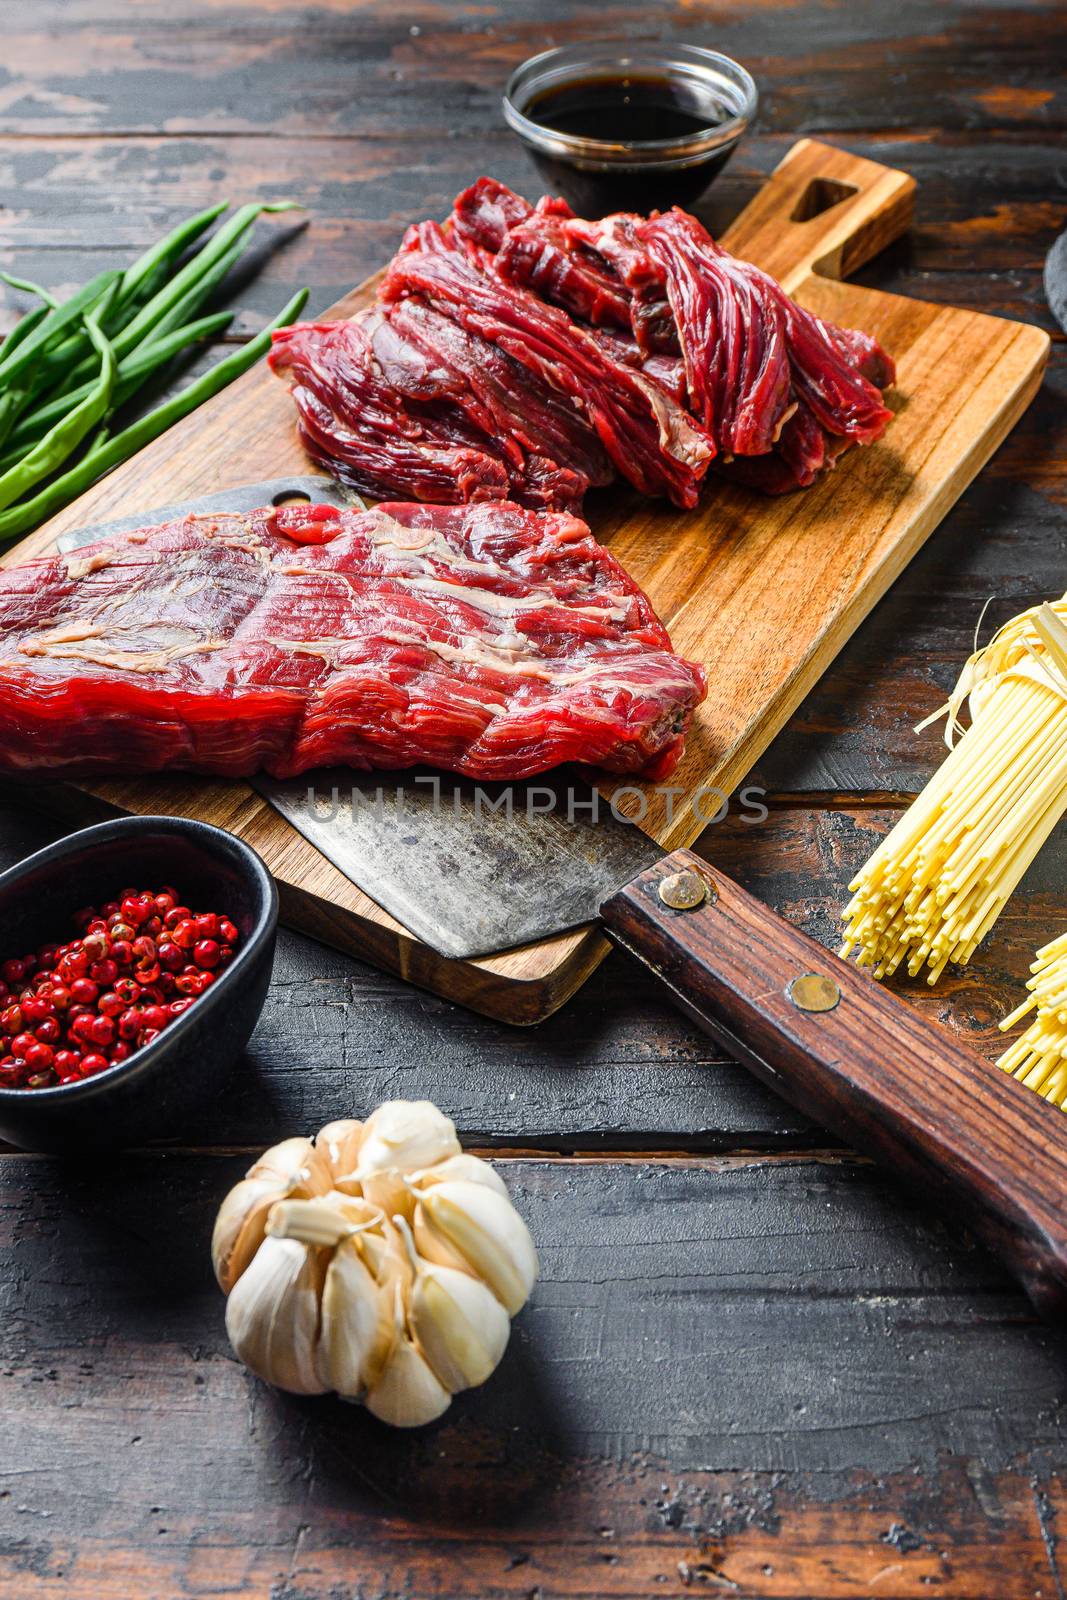 Chinese noodles with vegetables, . Machete steak and butcher cleaver over wooden background. Side view. by Ilianesolenyi